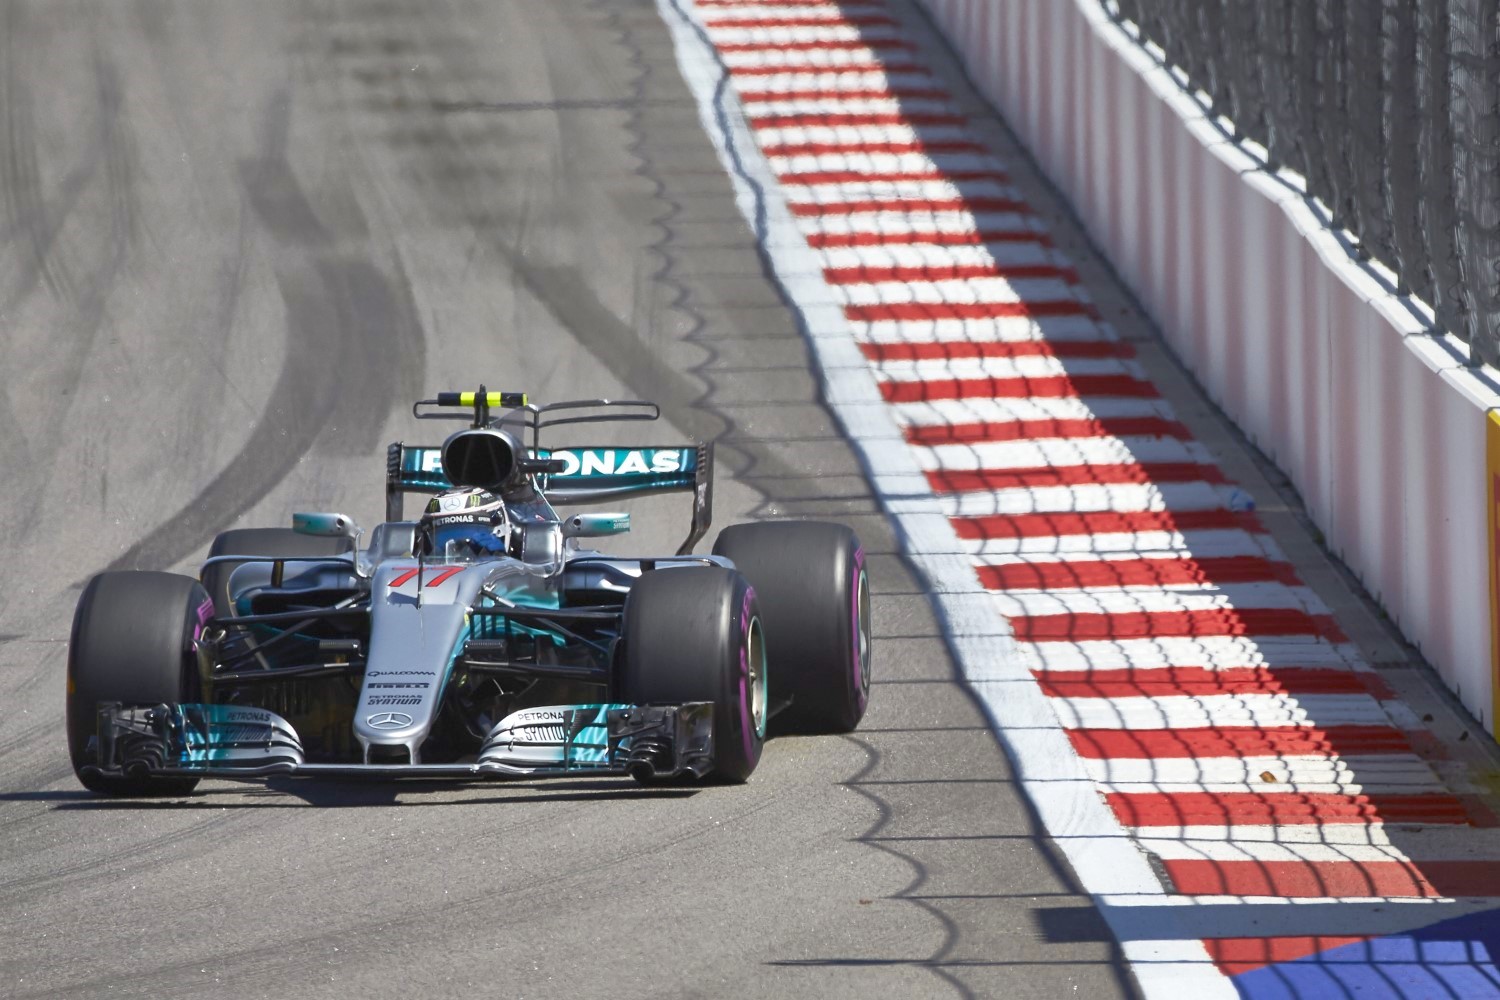 Bottas has outqualified teammate Hamilton two races in a row. Is Bottas the faster driver?